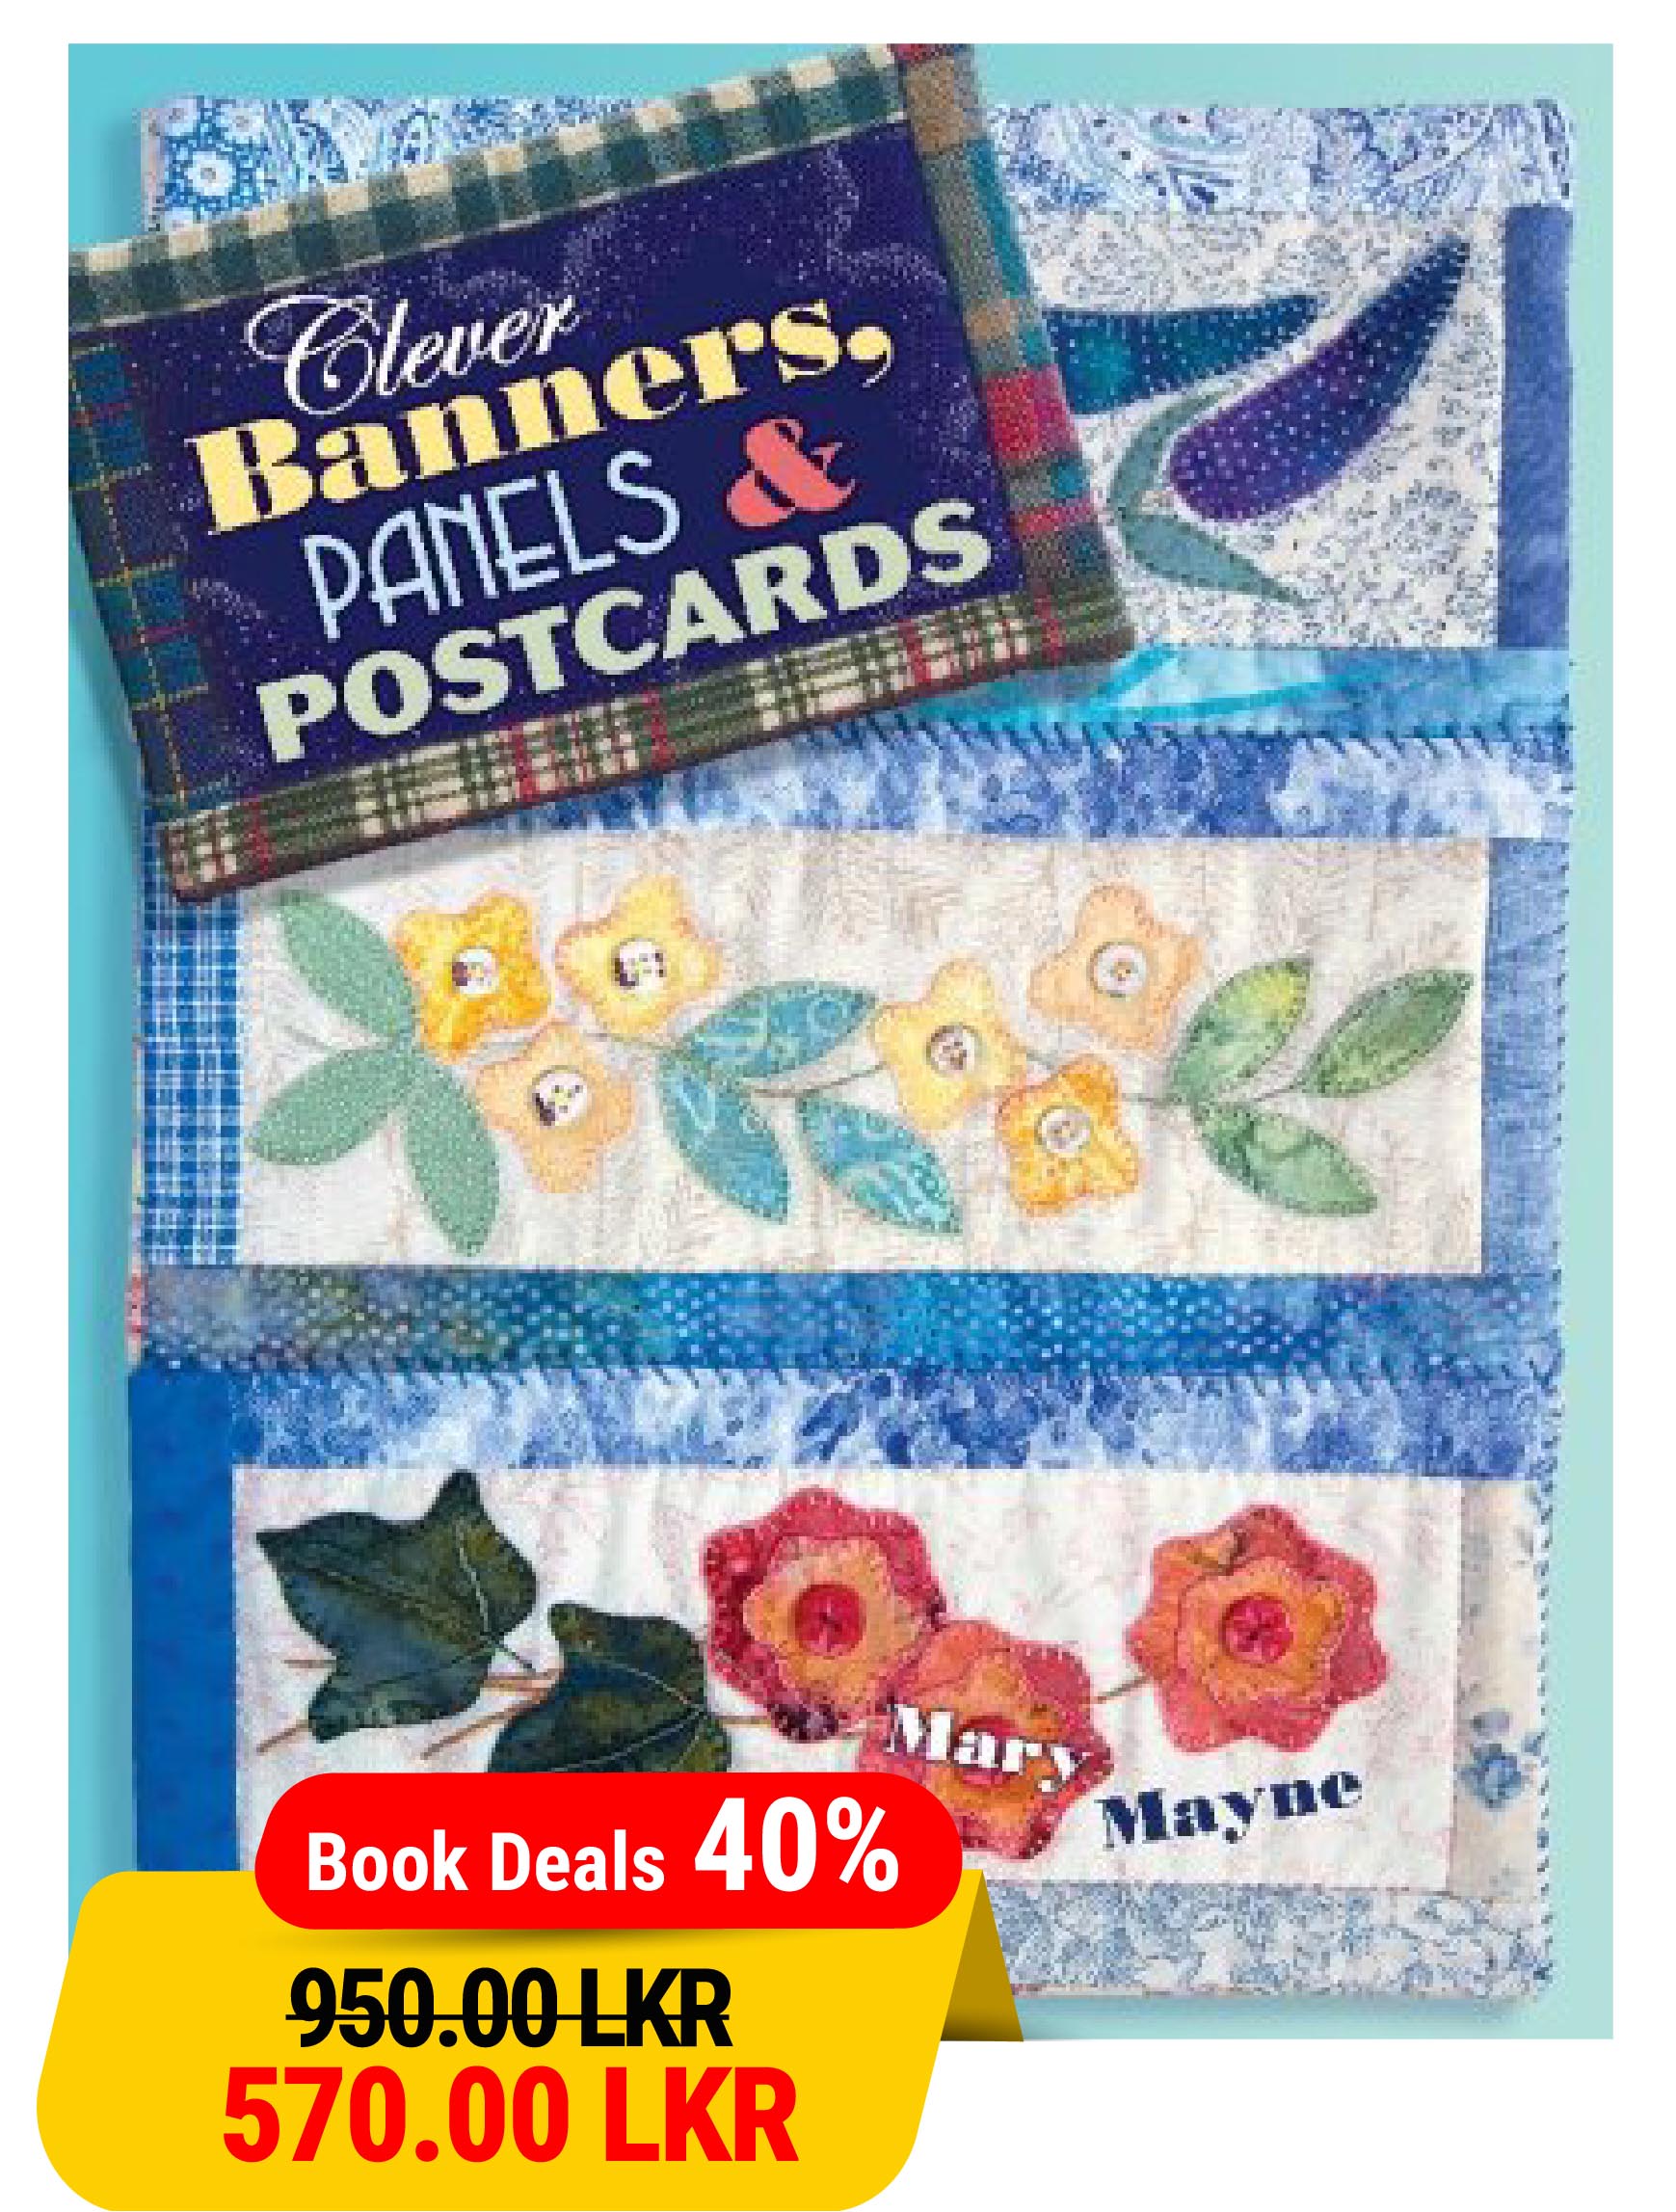 Clever Banners Panels & Postcards